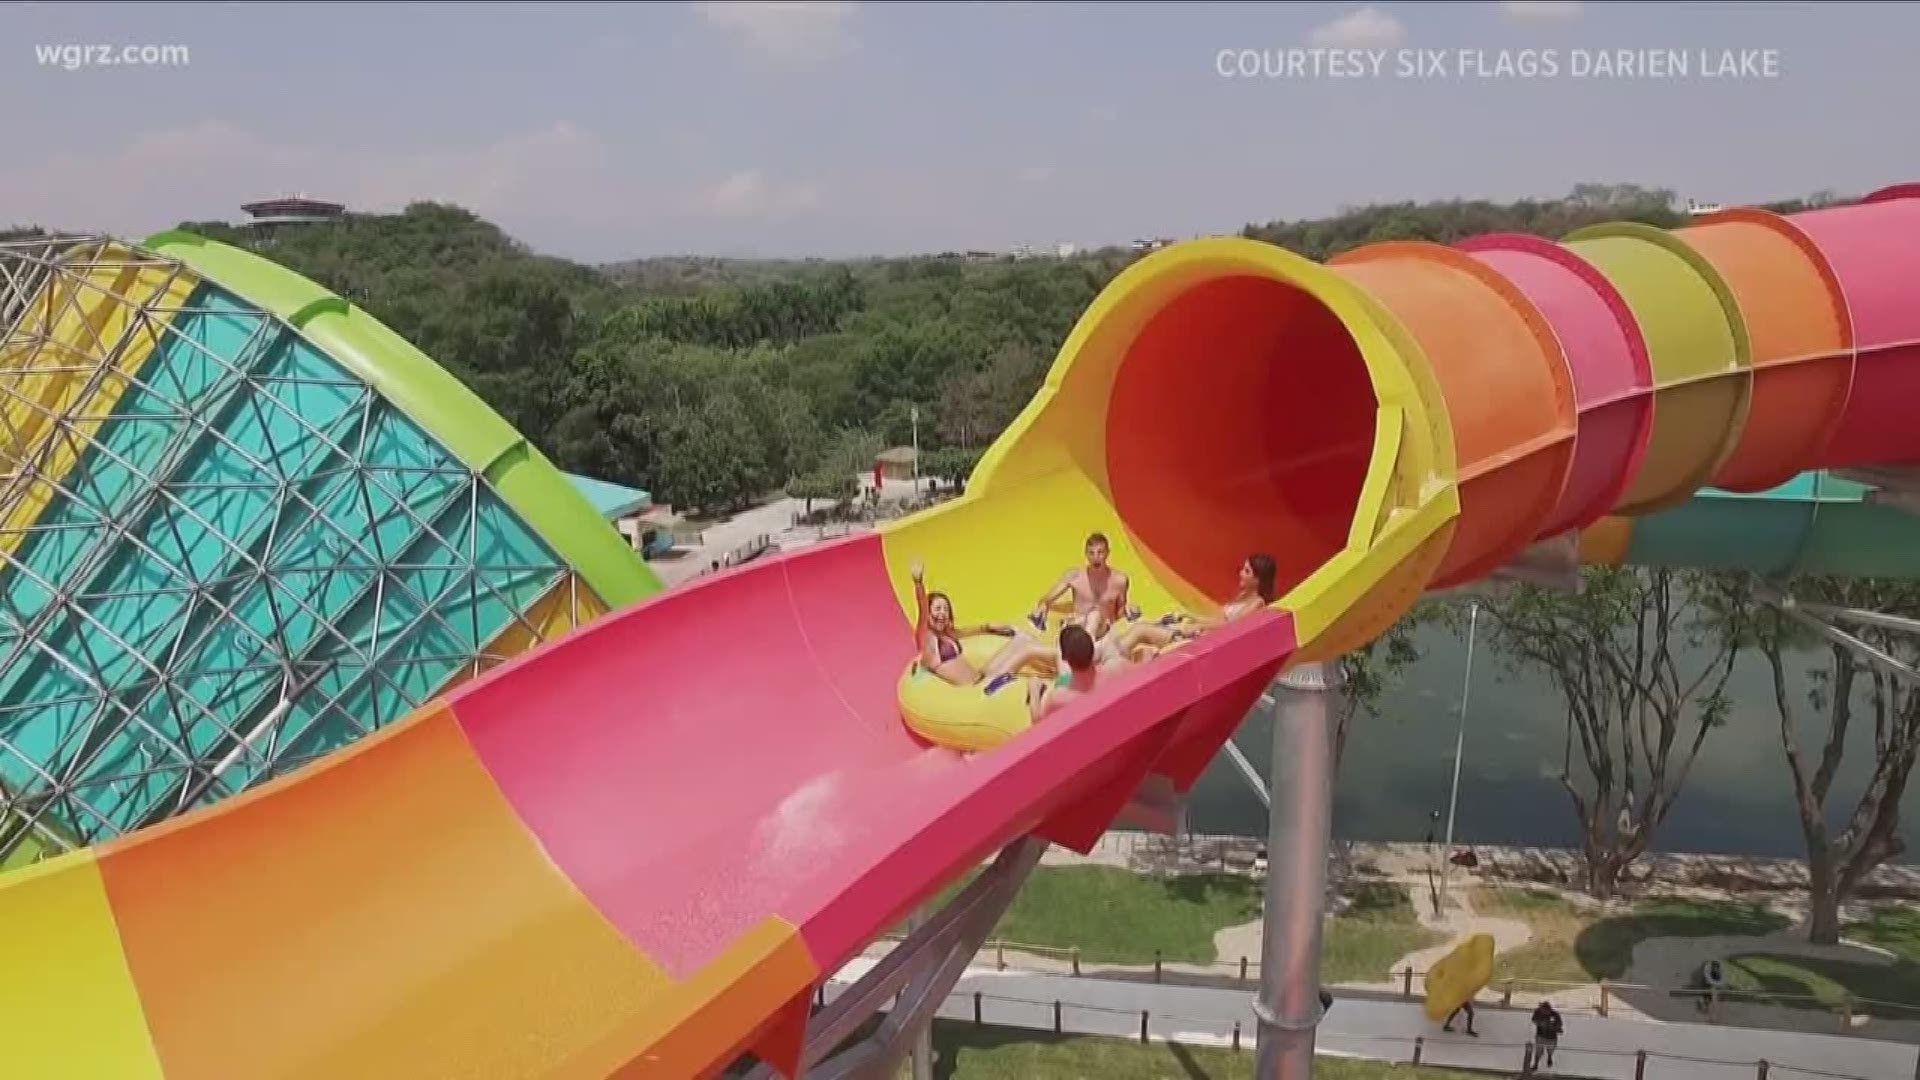 Six Flags Darien Lake has cleared one of the final hurdles to build a big new attraction.